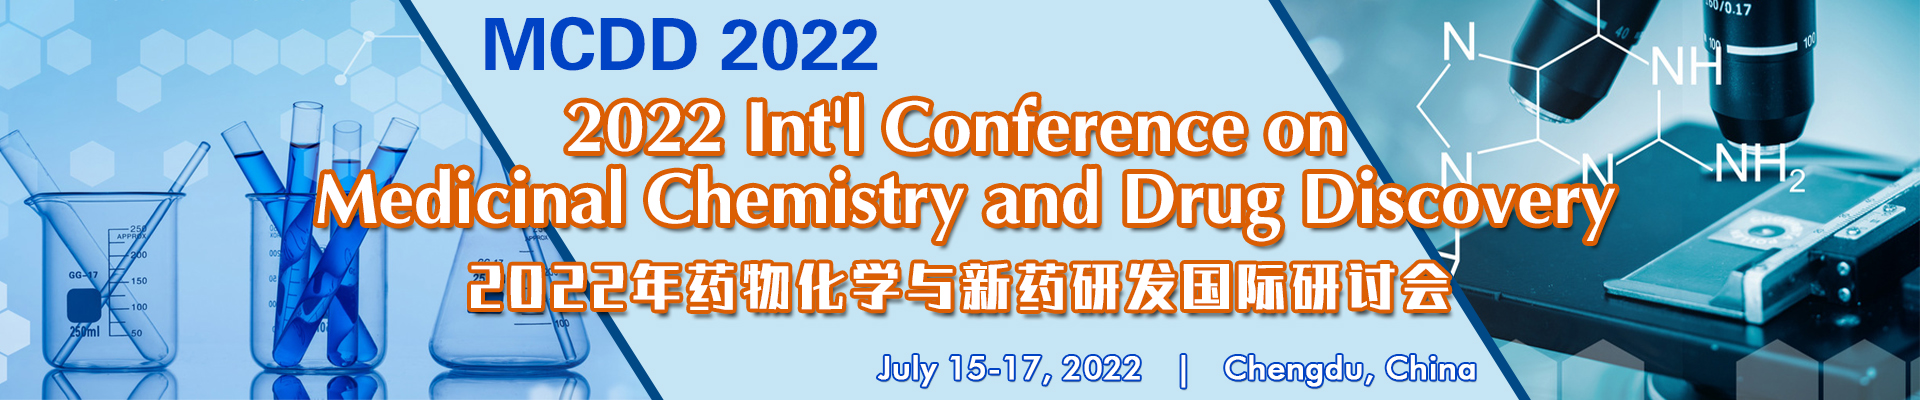 2022 International Conference on Medicinal Chemistry and Drug Discovery (MCDD 2022), Chengdu Xinliang Hotel, Sichuan, China